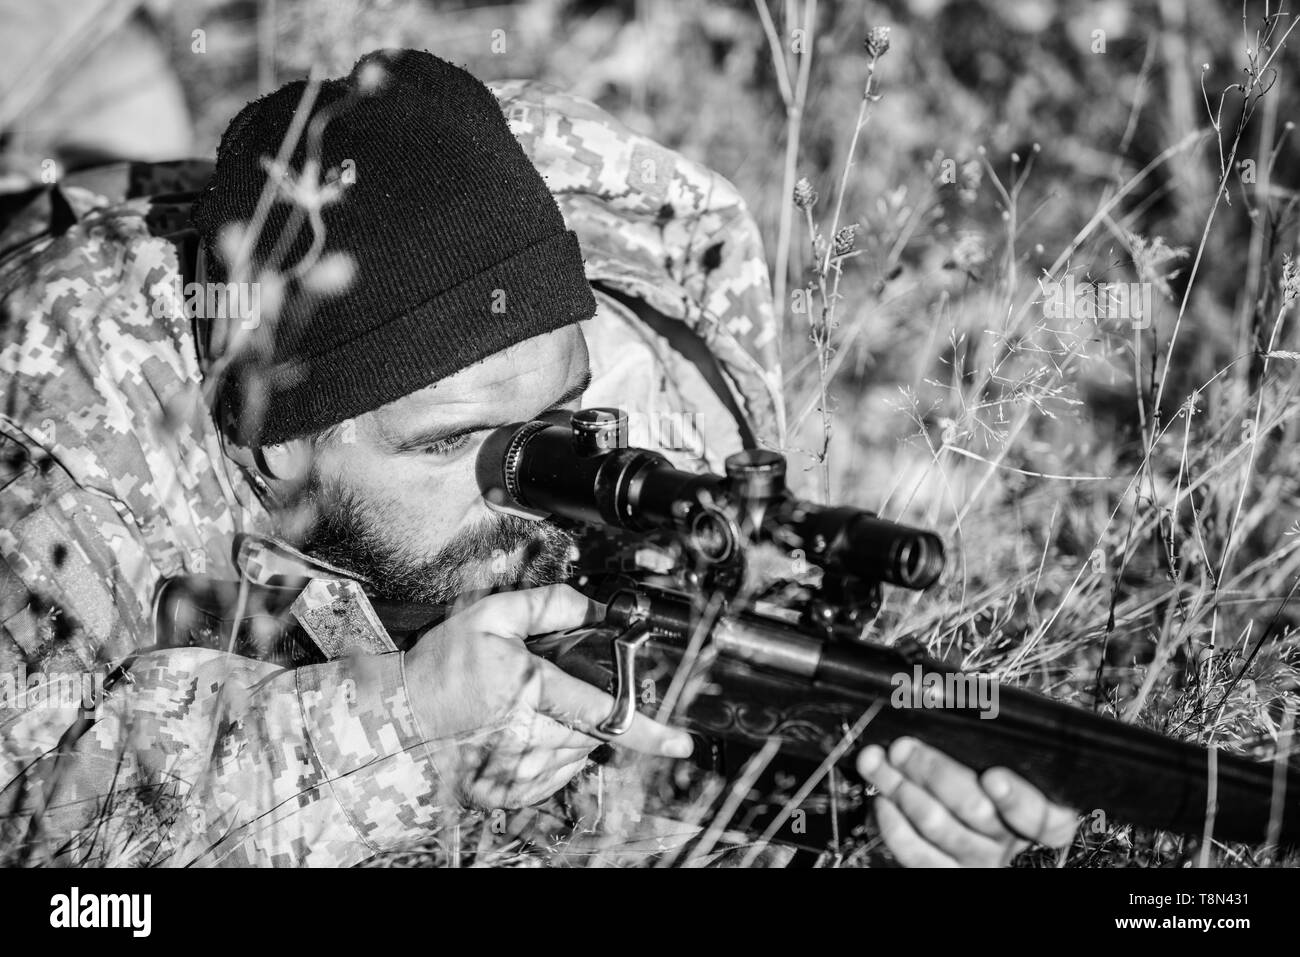 Hunting skills and weapon equipment. How turn hunting into hobby. Bearded man hunter. Army forces. Camouflage. Military uniform fashion. Man hunter with rifle gun. Boot camp. Army soldiers. Stock Photo